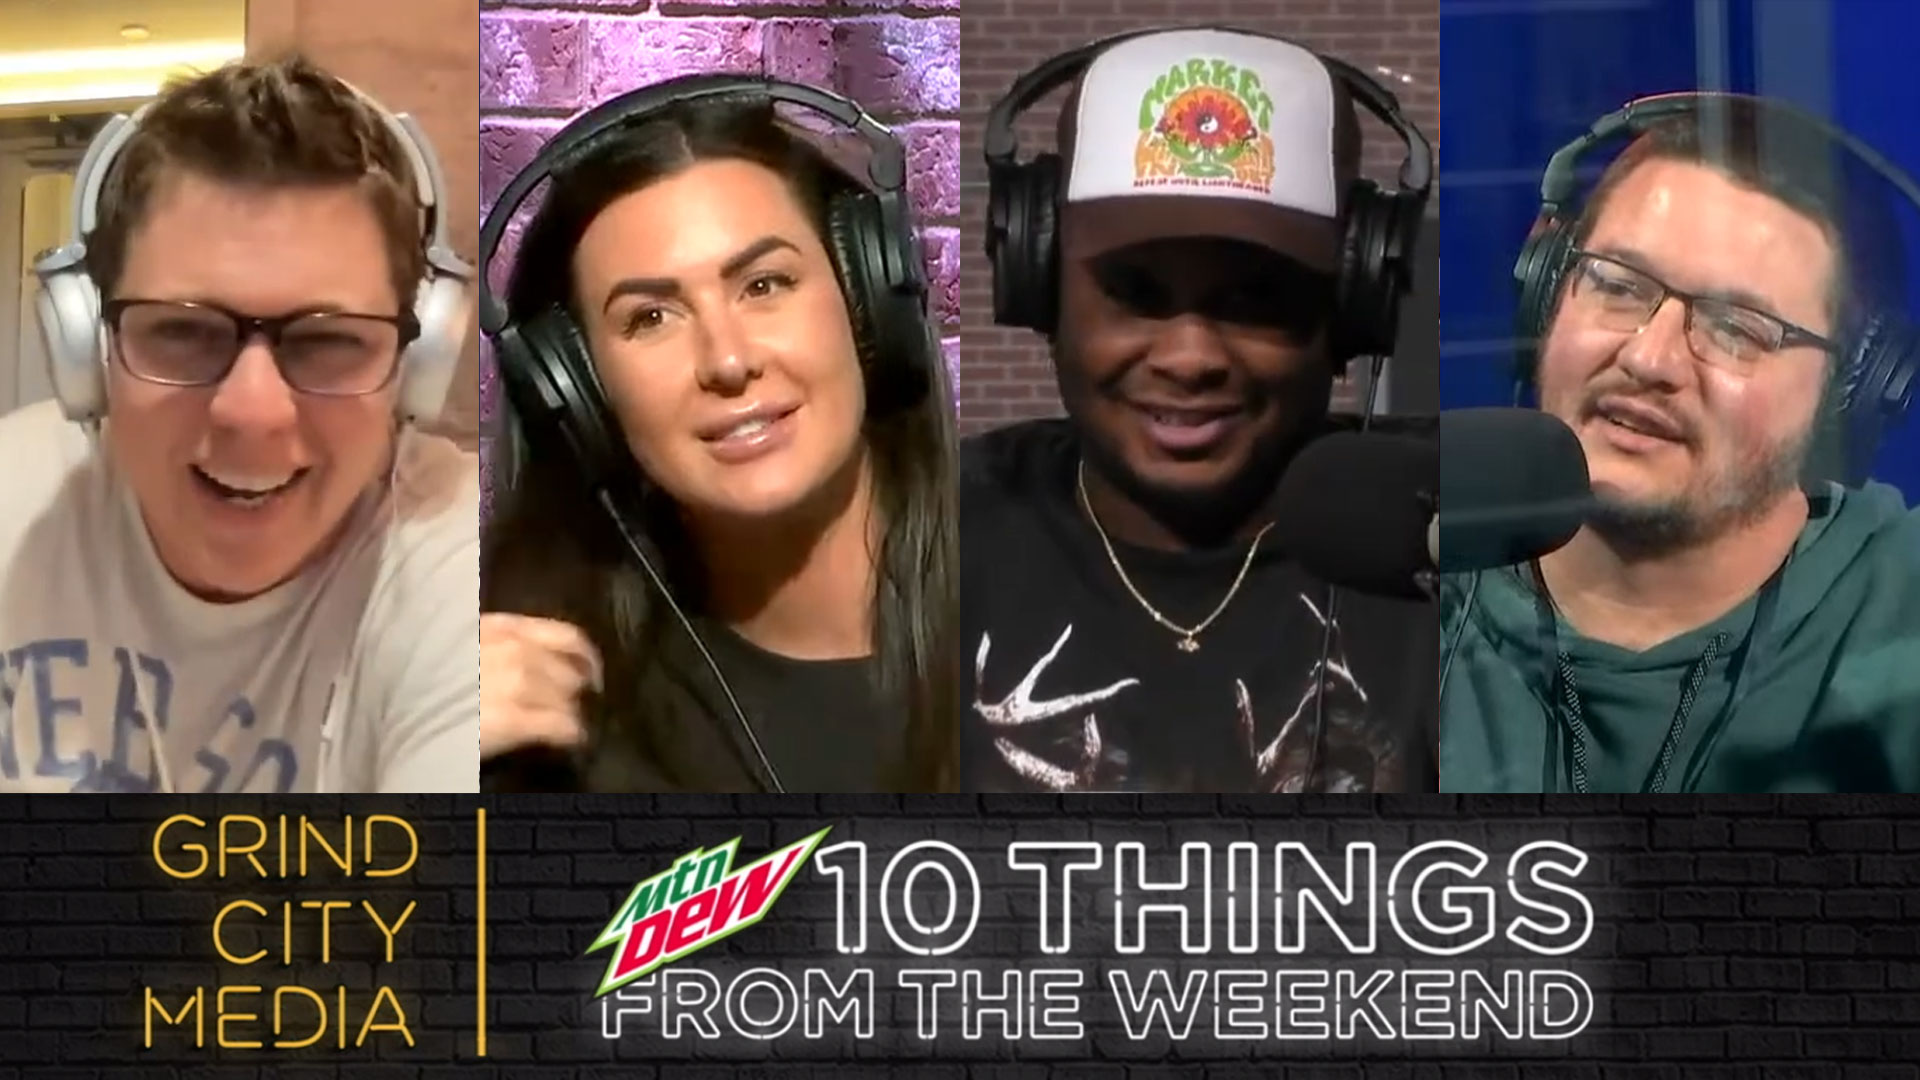 Chris Vernon Show: 10 THINGS FROM THE WEEKEND